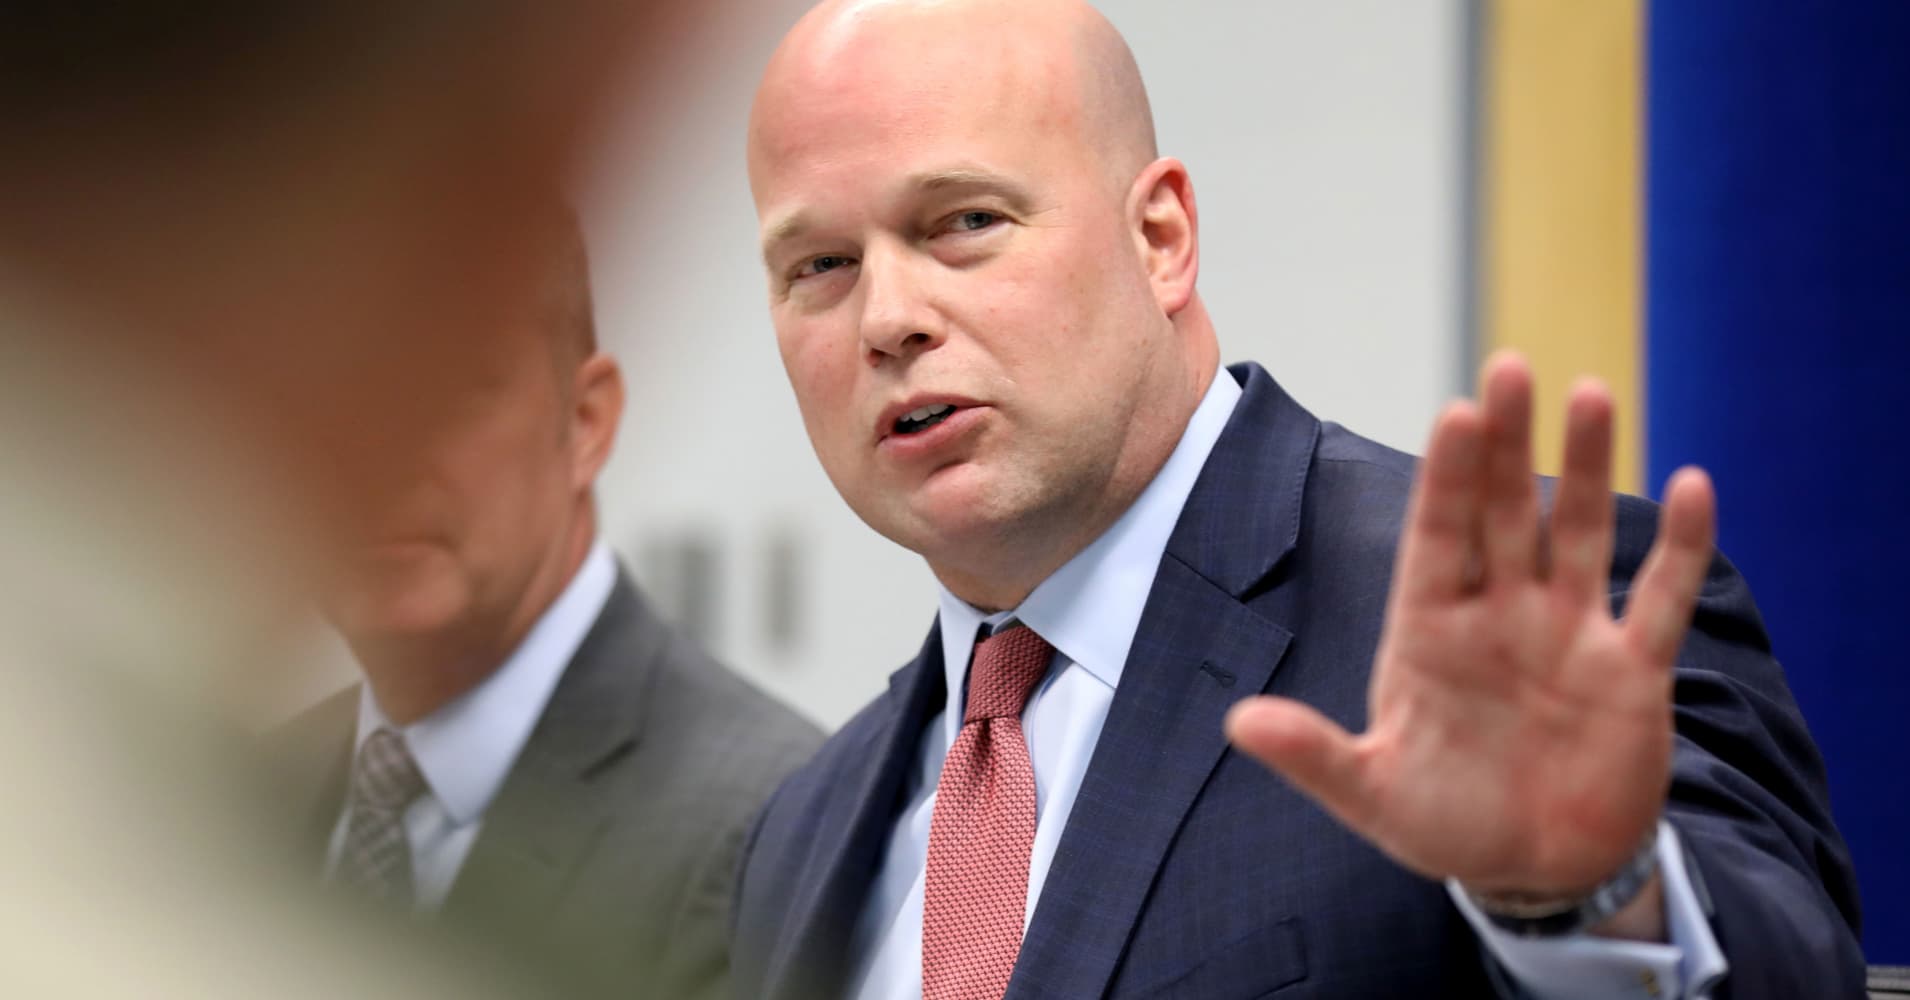 Acting Attorney General Matt Whitaker got $1.2 million from nonprofit that won't disclose its donors